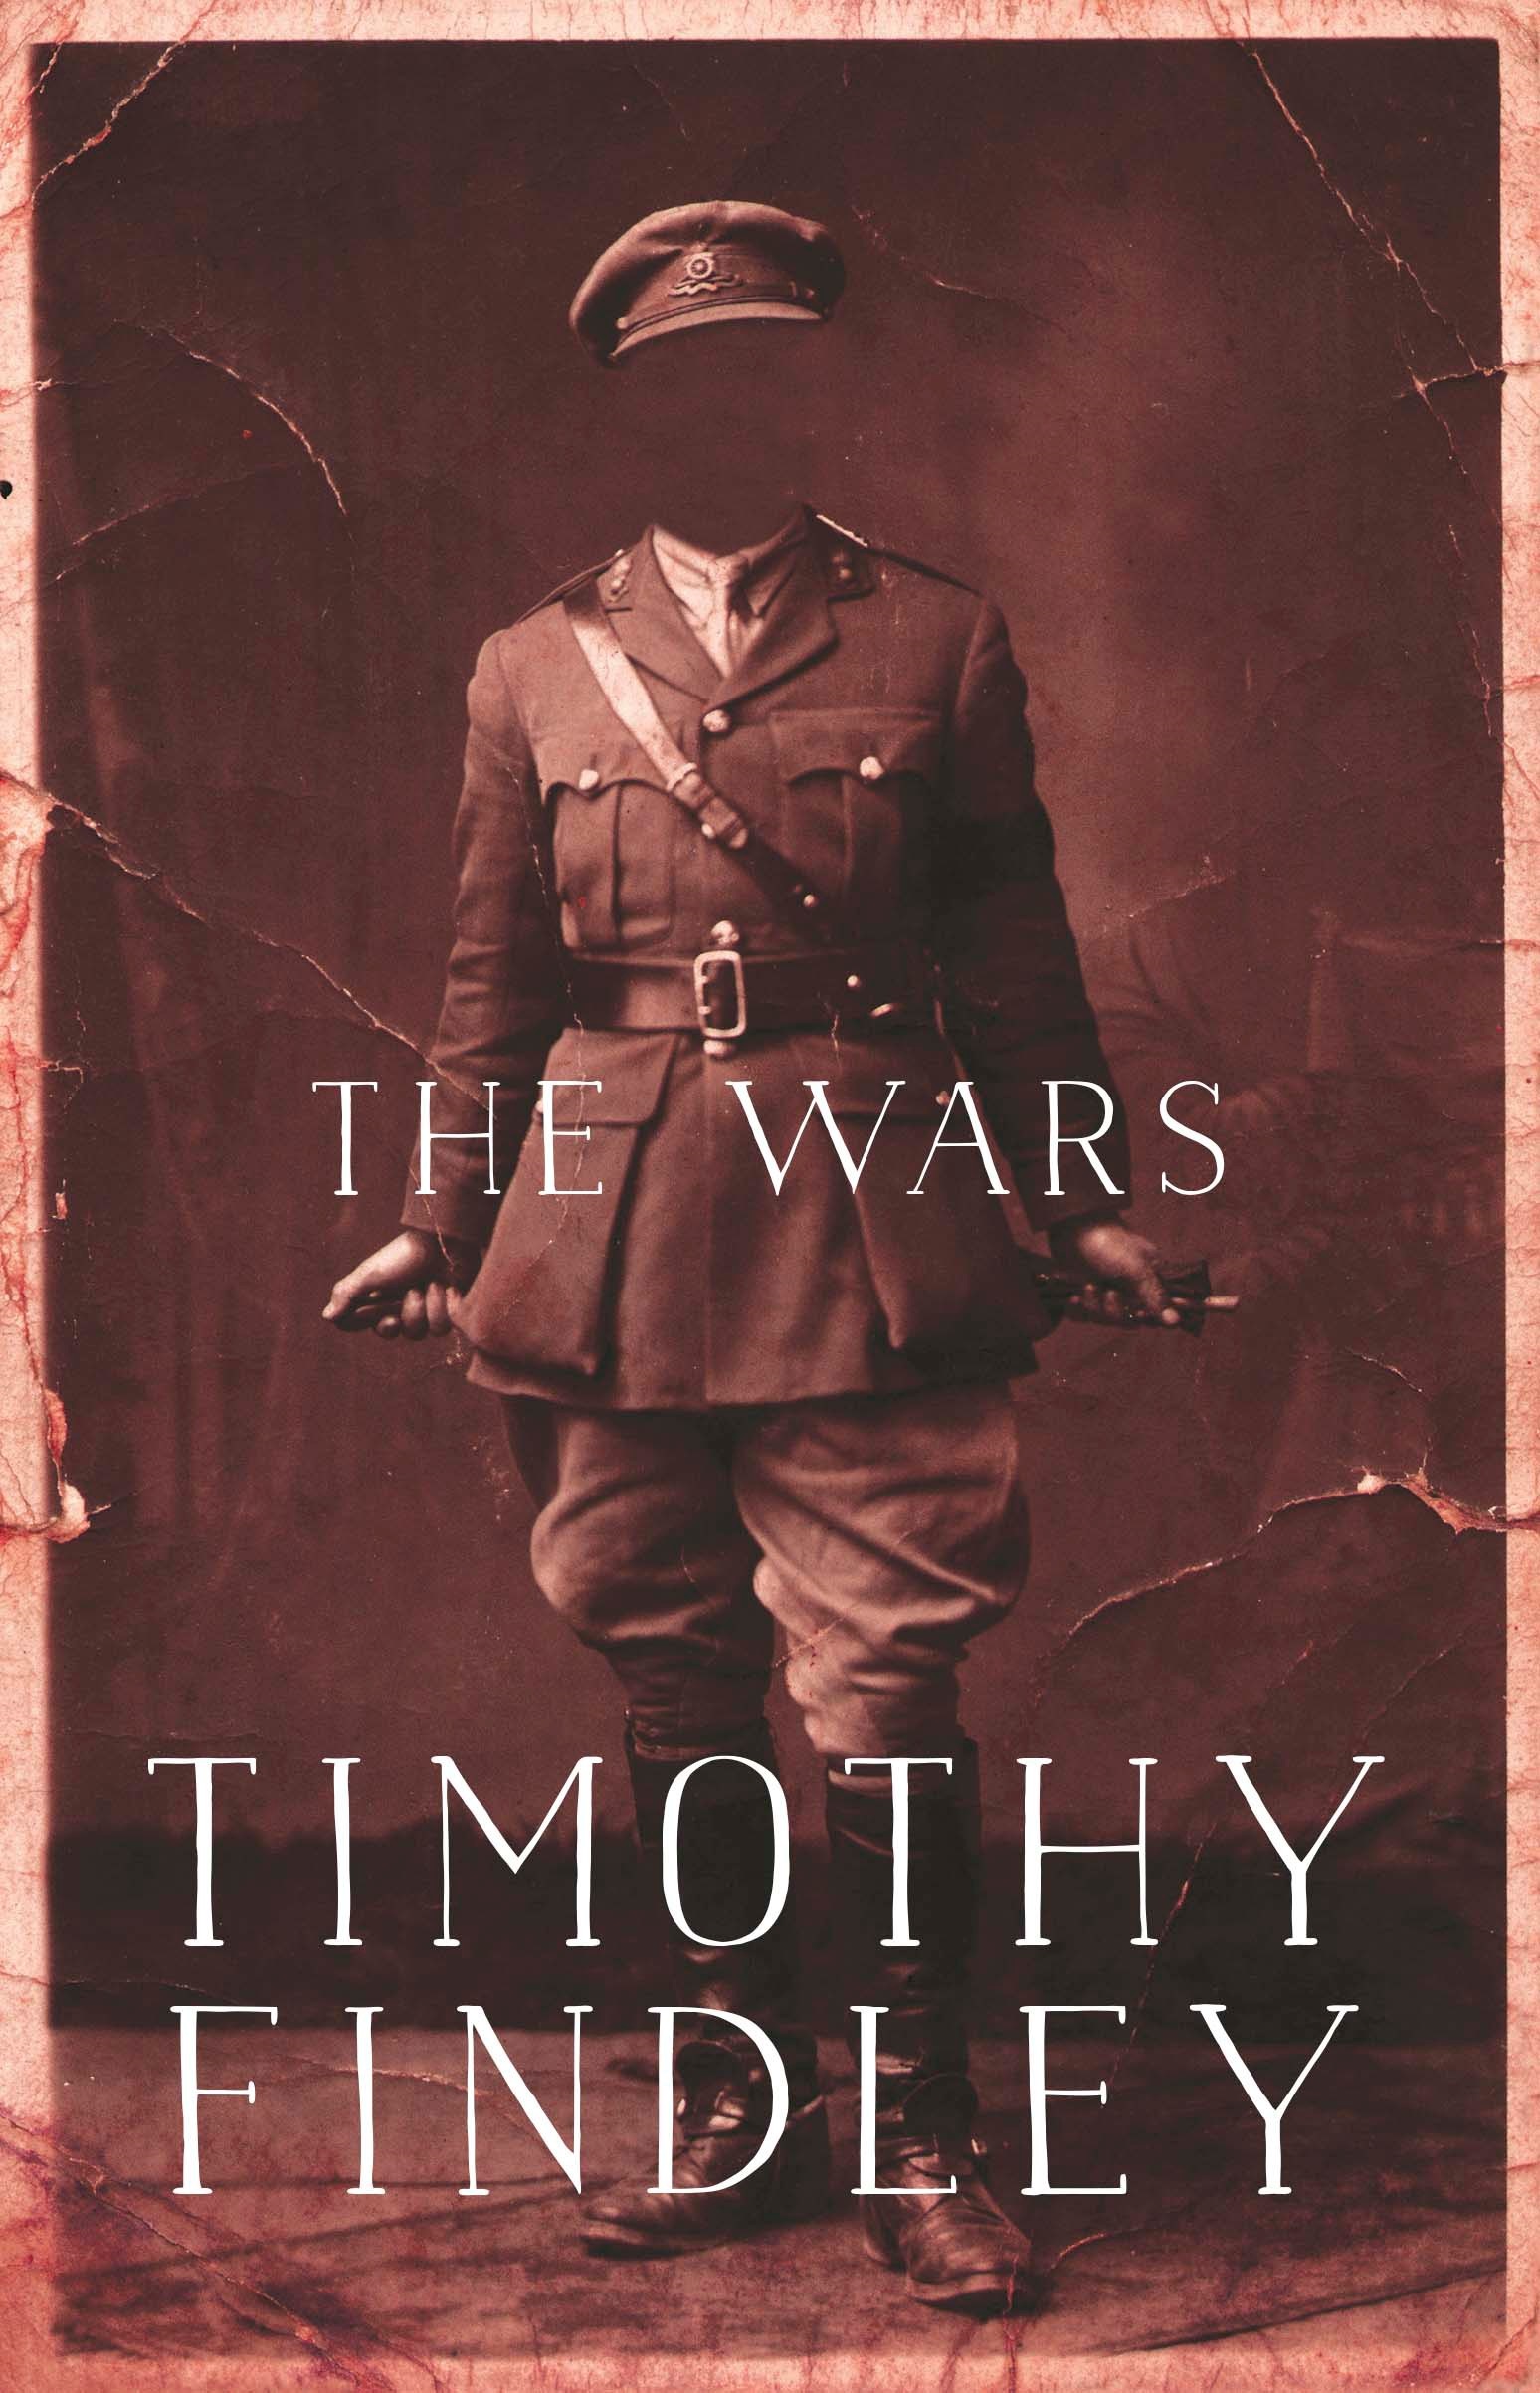 The Wars by Timothy Findley